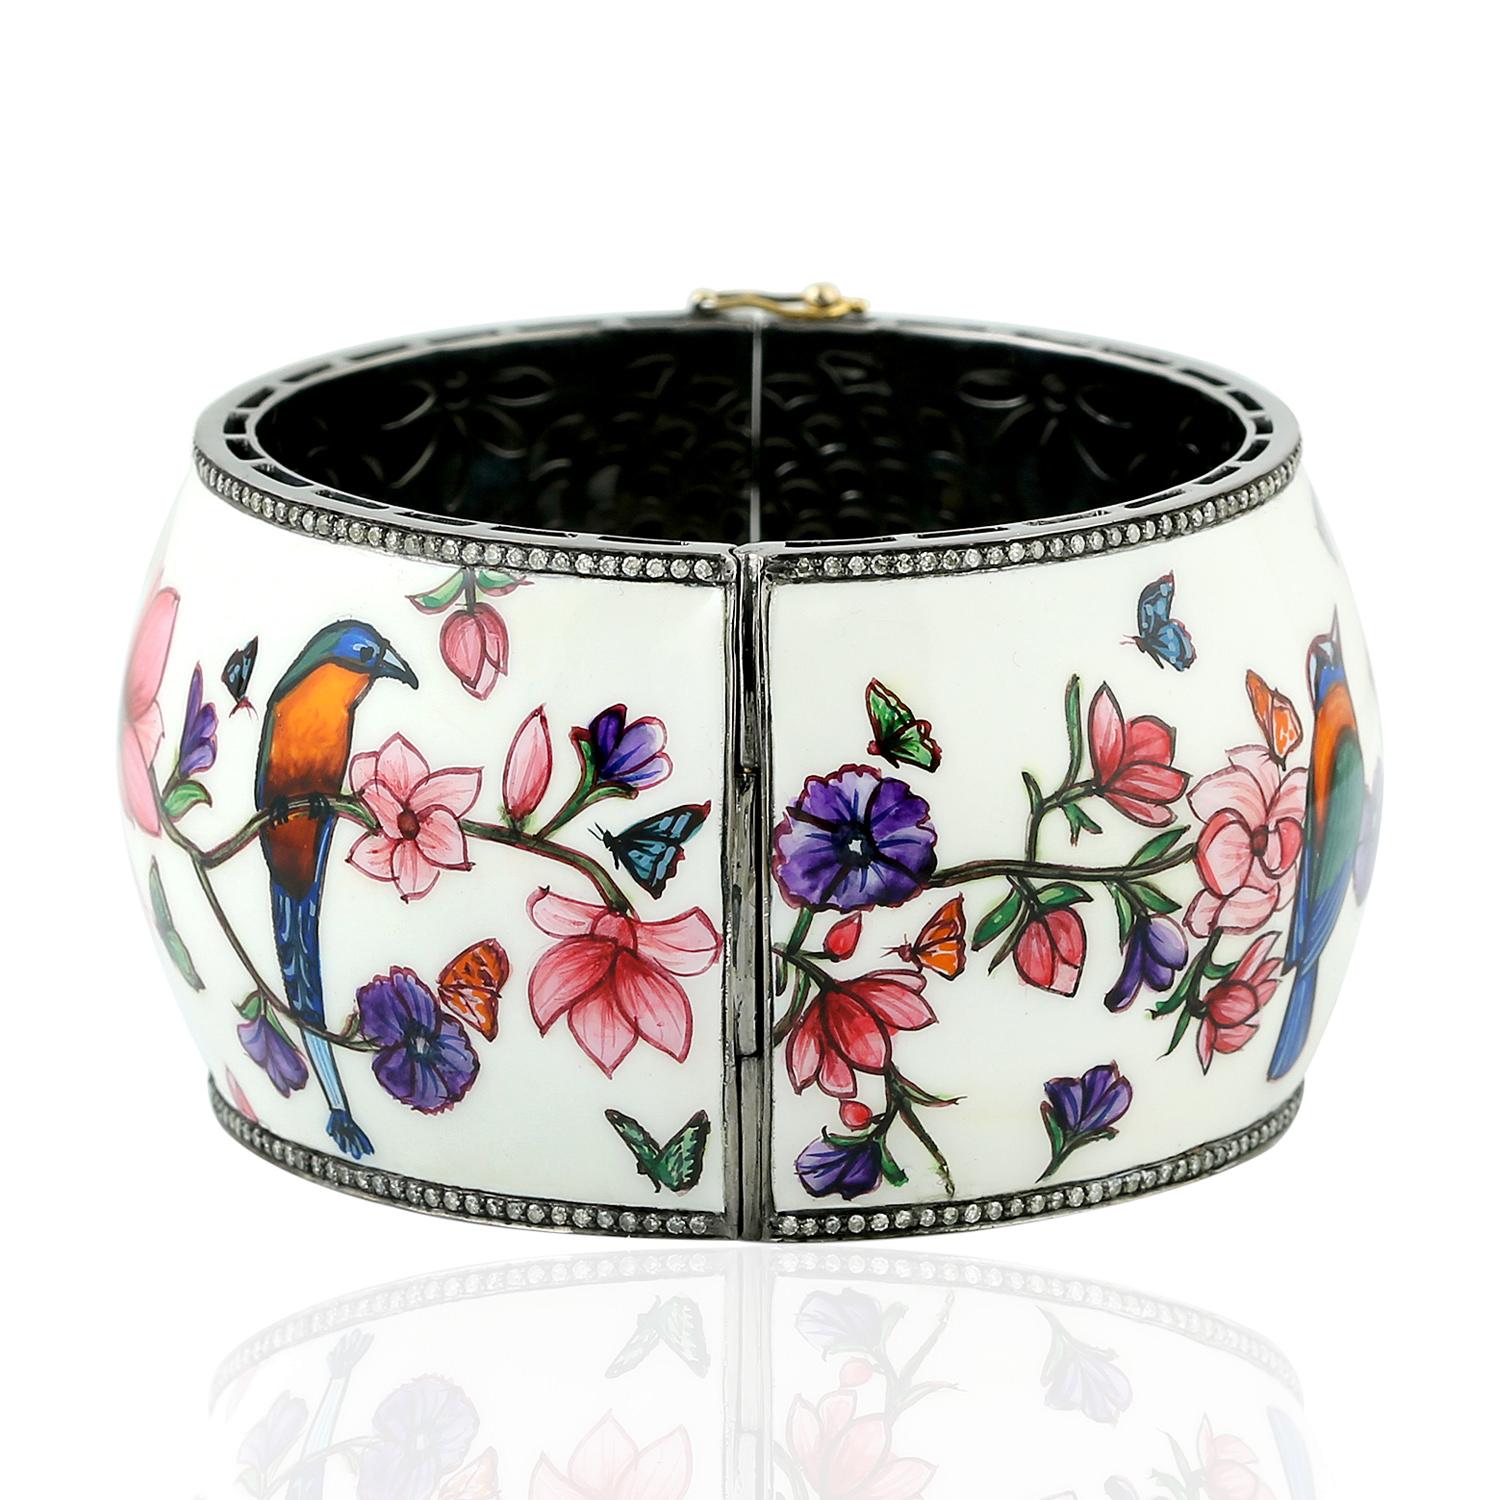 This cuff bracelet features a stunning bird design that has been carefully enameled to showcase its intricate details and colors. The edges of the cuff are decorated with a breathtaking pave of diamonds that catch the light and add a touch of